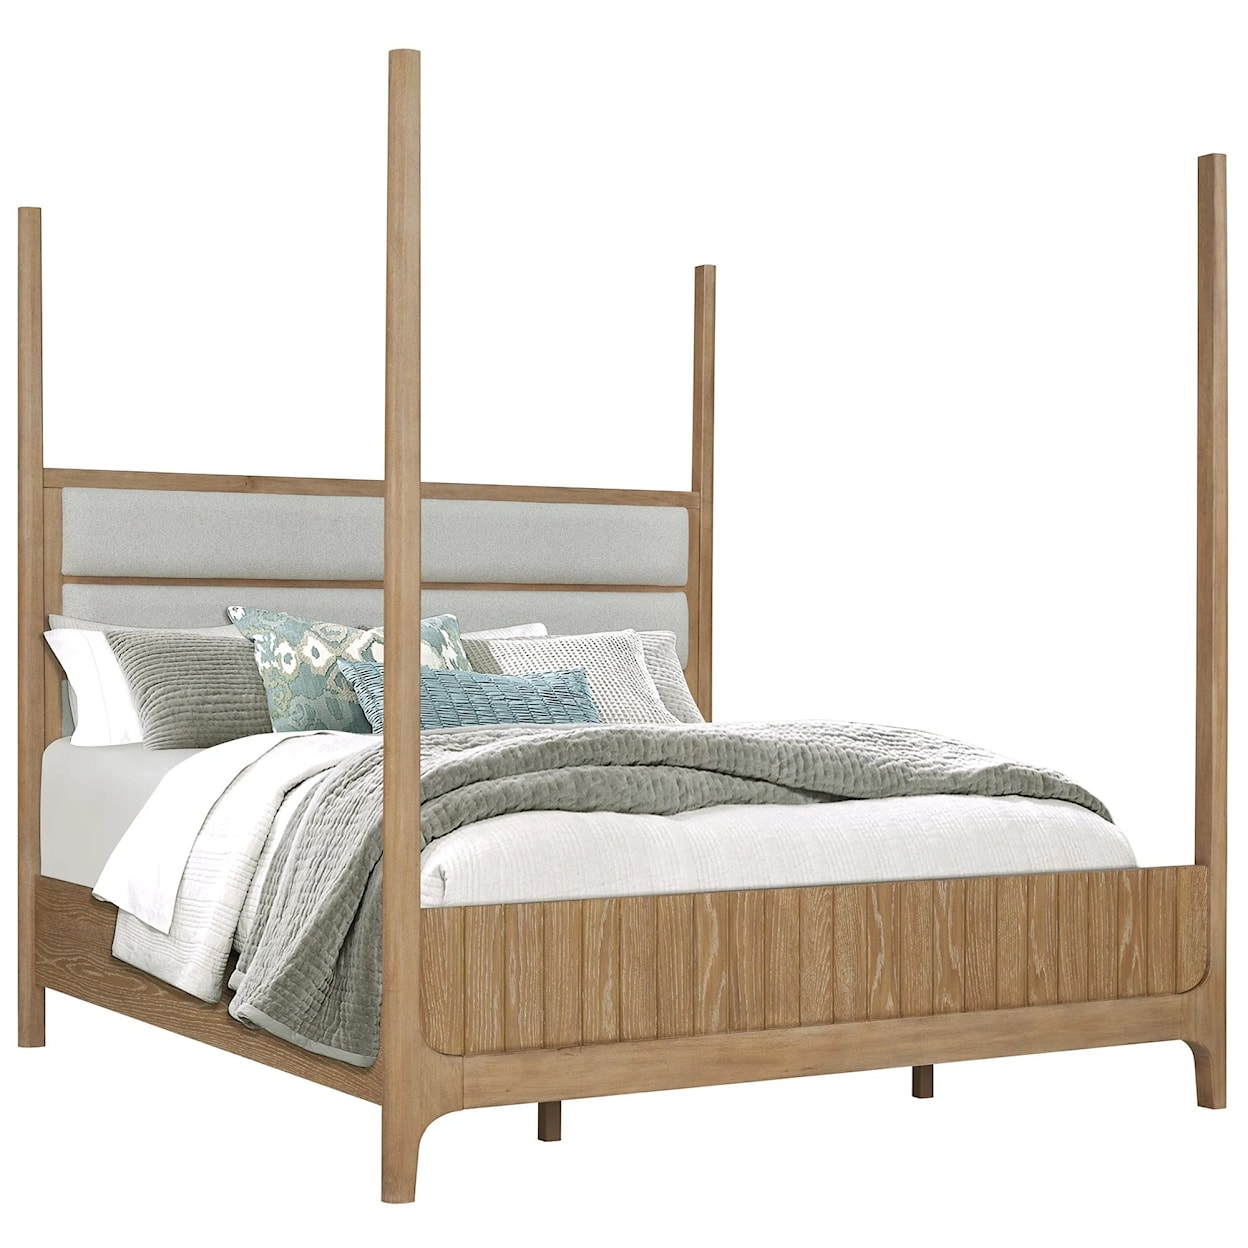 PH Escape Queen Poster Bed